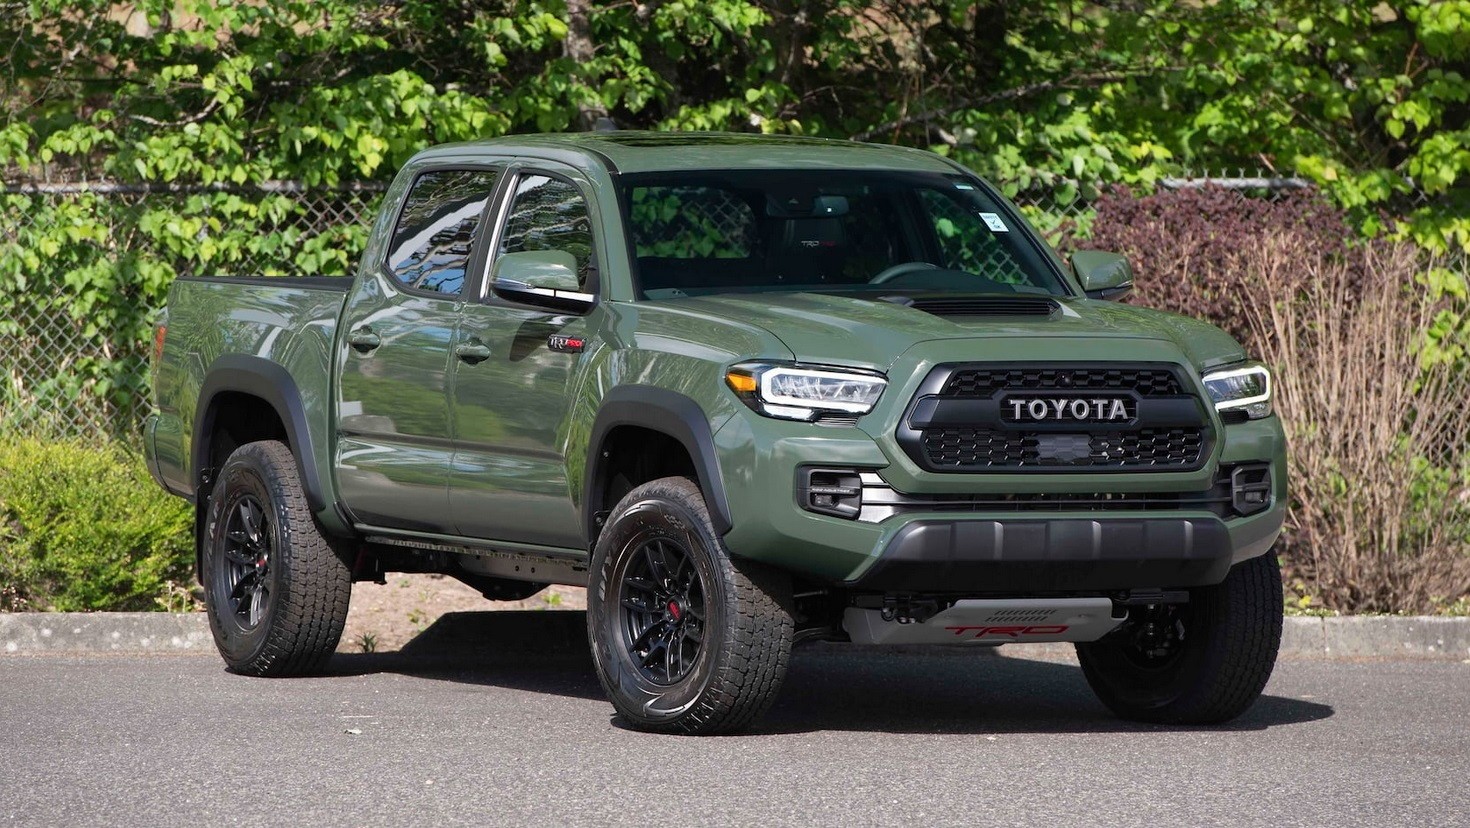 Do You Have A Moment To Talk About The Millionth Toyota Tacoma Up For